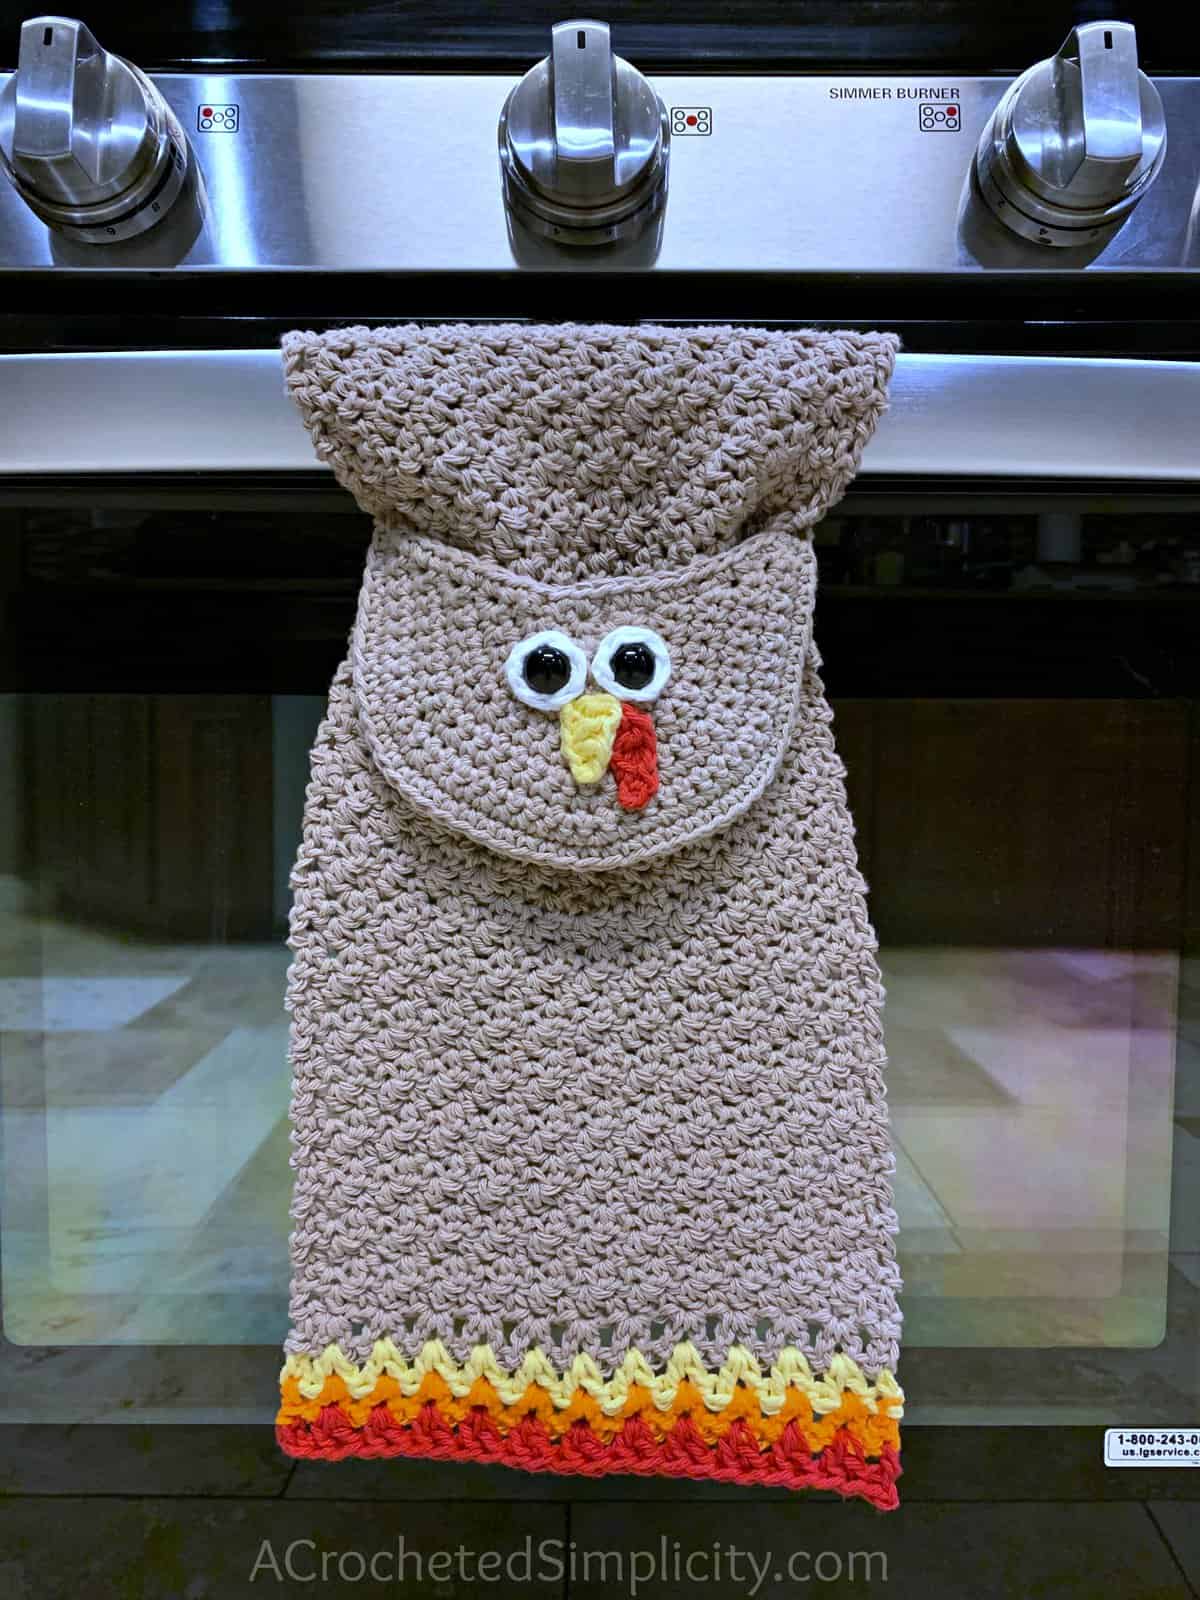 Crocheted Get Your Gobble On Kitchen Towel with Brown Yarn